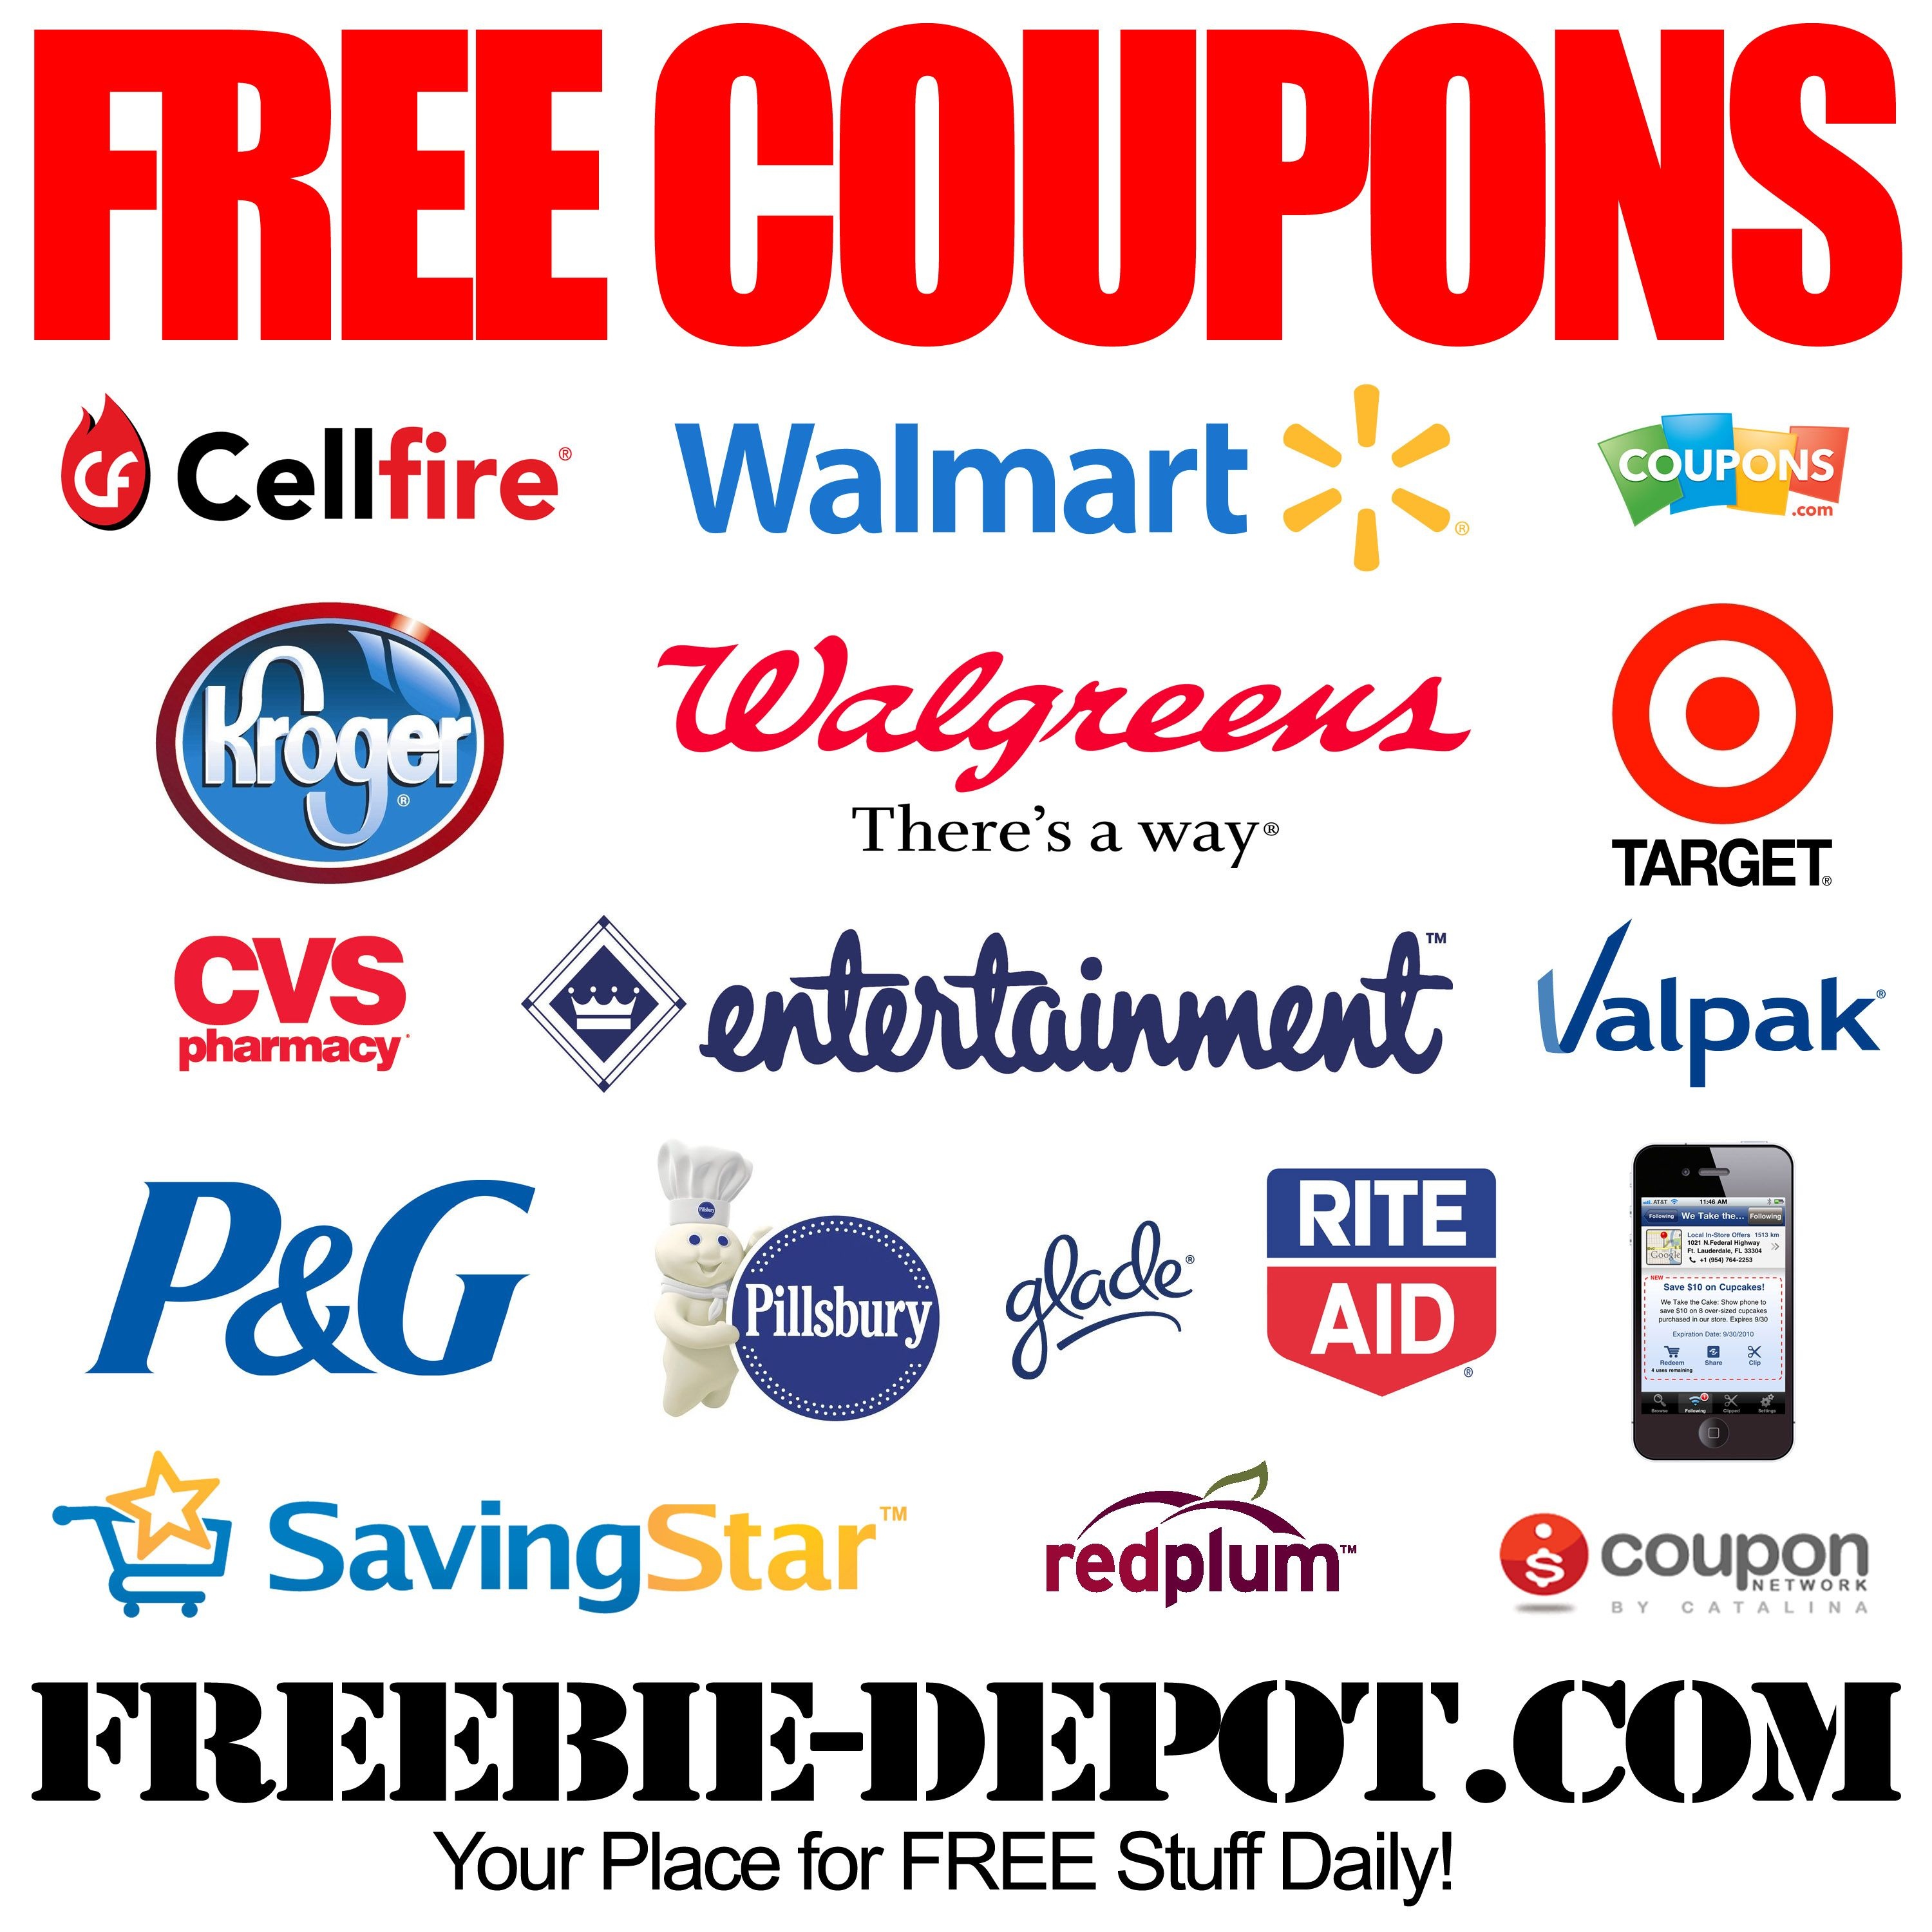 Free Coupons - Free Printable Coupons - Free Grocery Coupons - Free Printable Coupons Without Downloading Or Registering